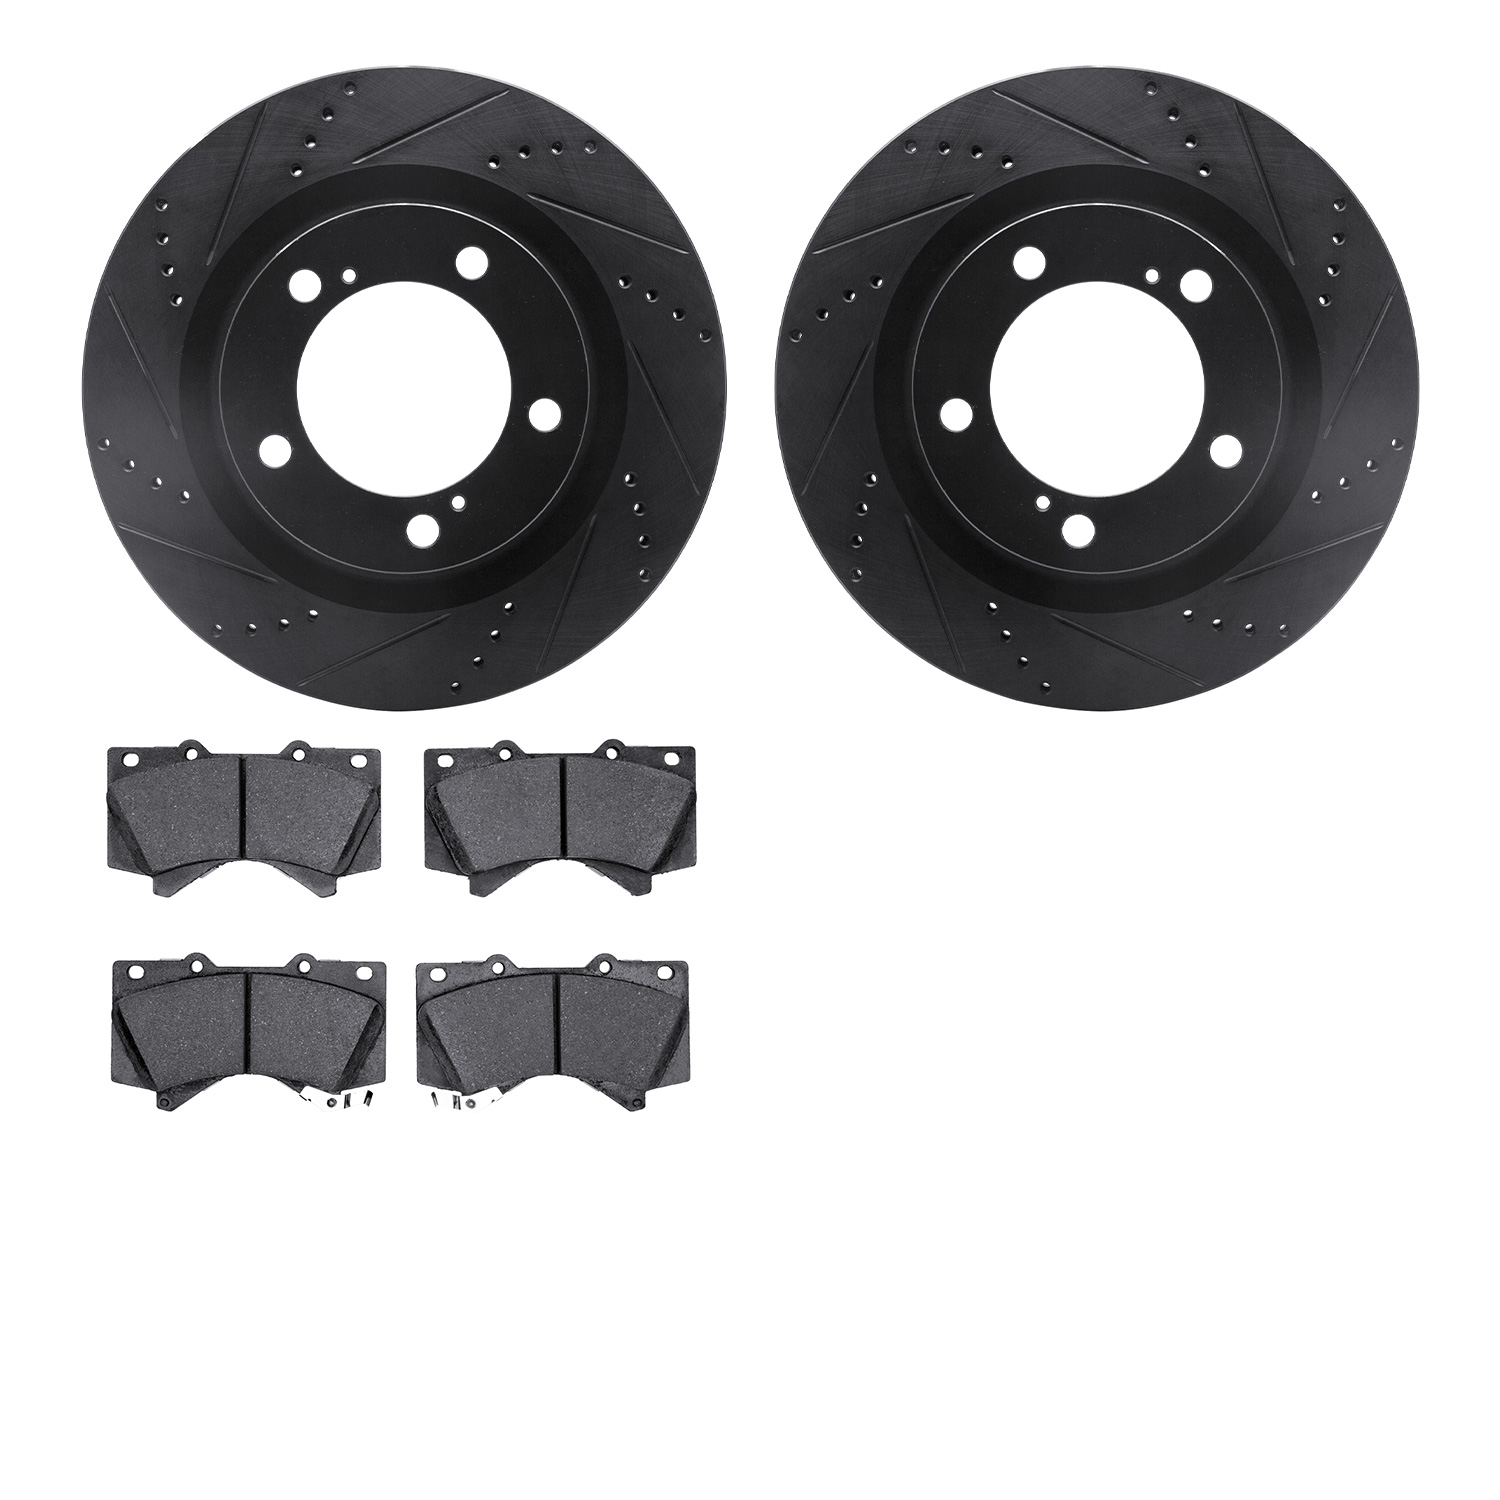 8302-76161 Drilled/Slotted Brake Rotors with 3000-Series Ceramic Brake Pads Kit [Black], Fits Select Lexus/Toyota/Scion, Positio